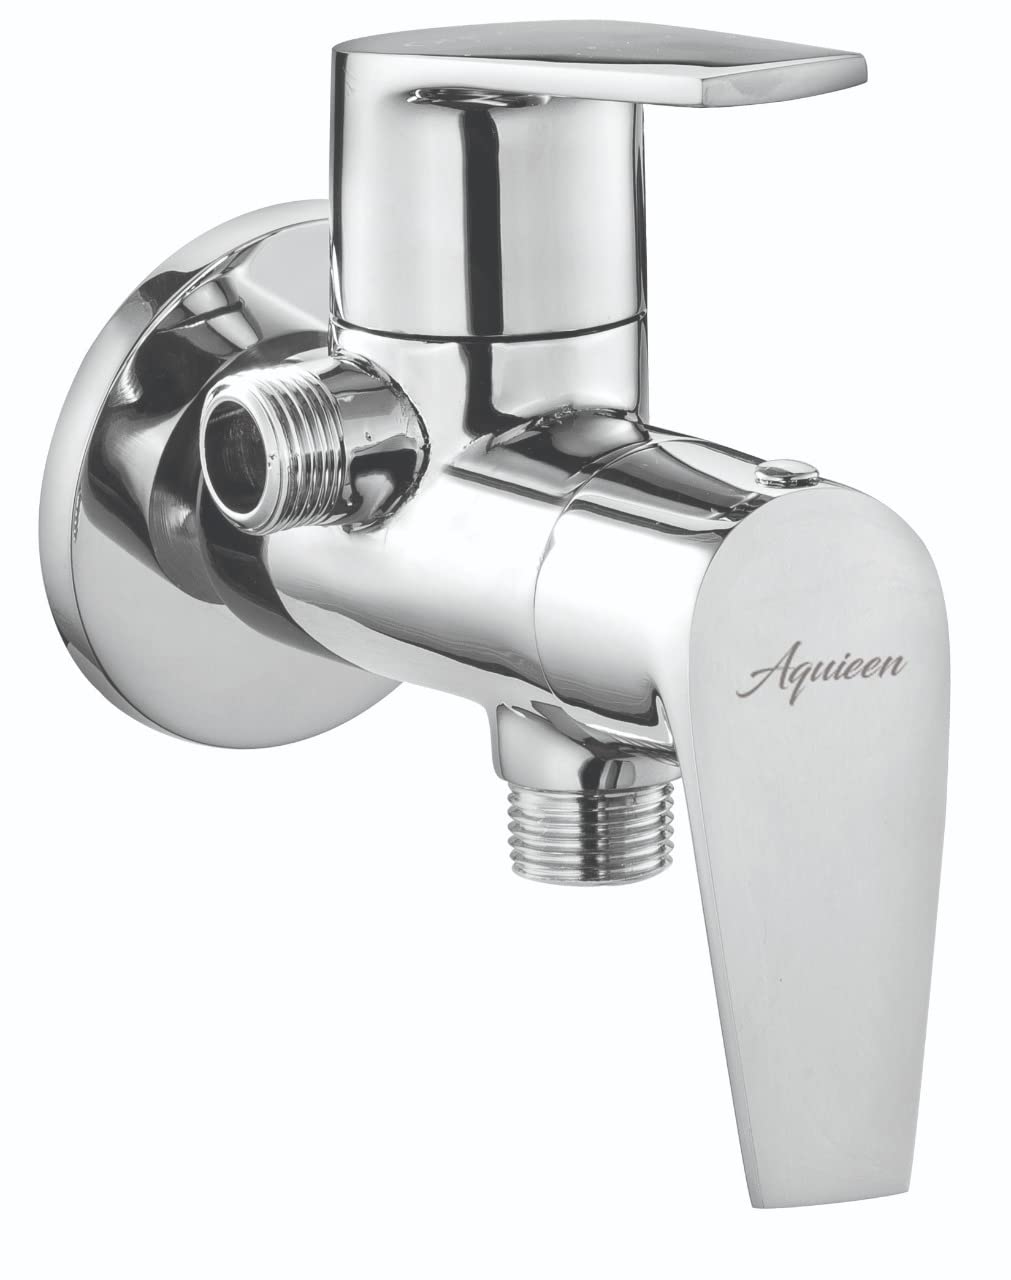 ?Aquieen Entice Brass Luxury Series 2 In 1 Angle Valve With Wall Flange Chrome